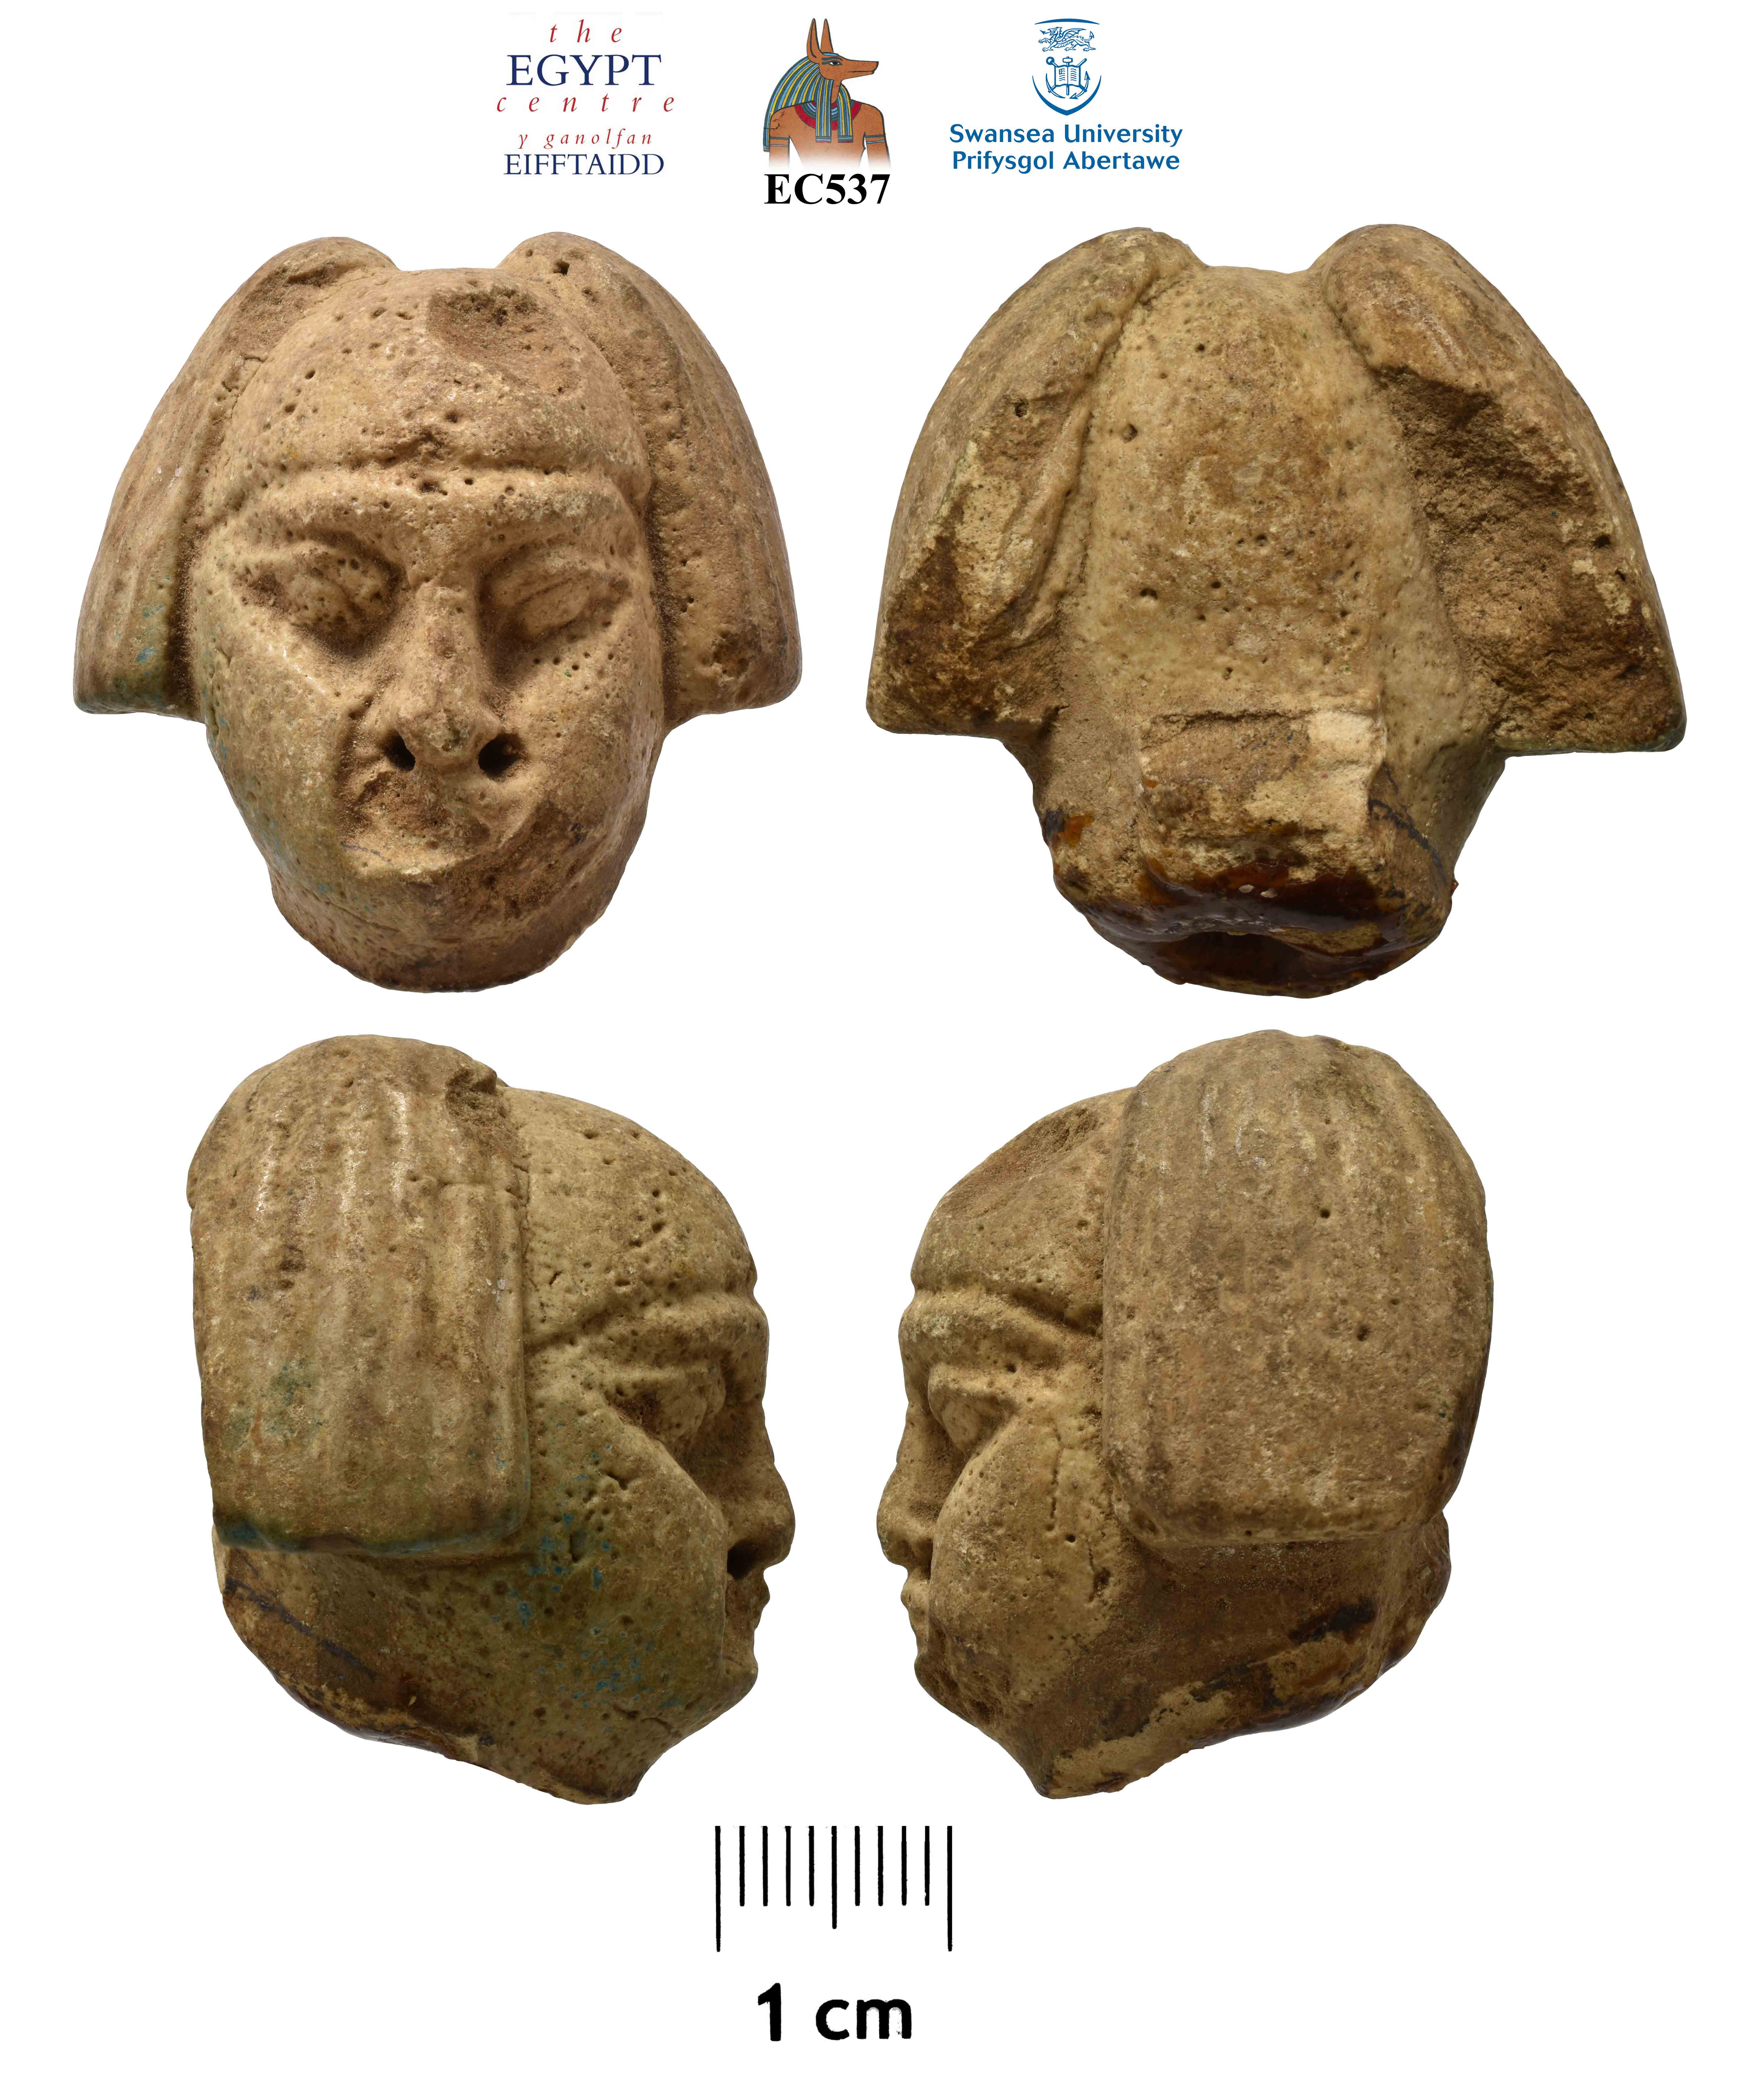 Image for: Head of a Nubian figure